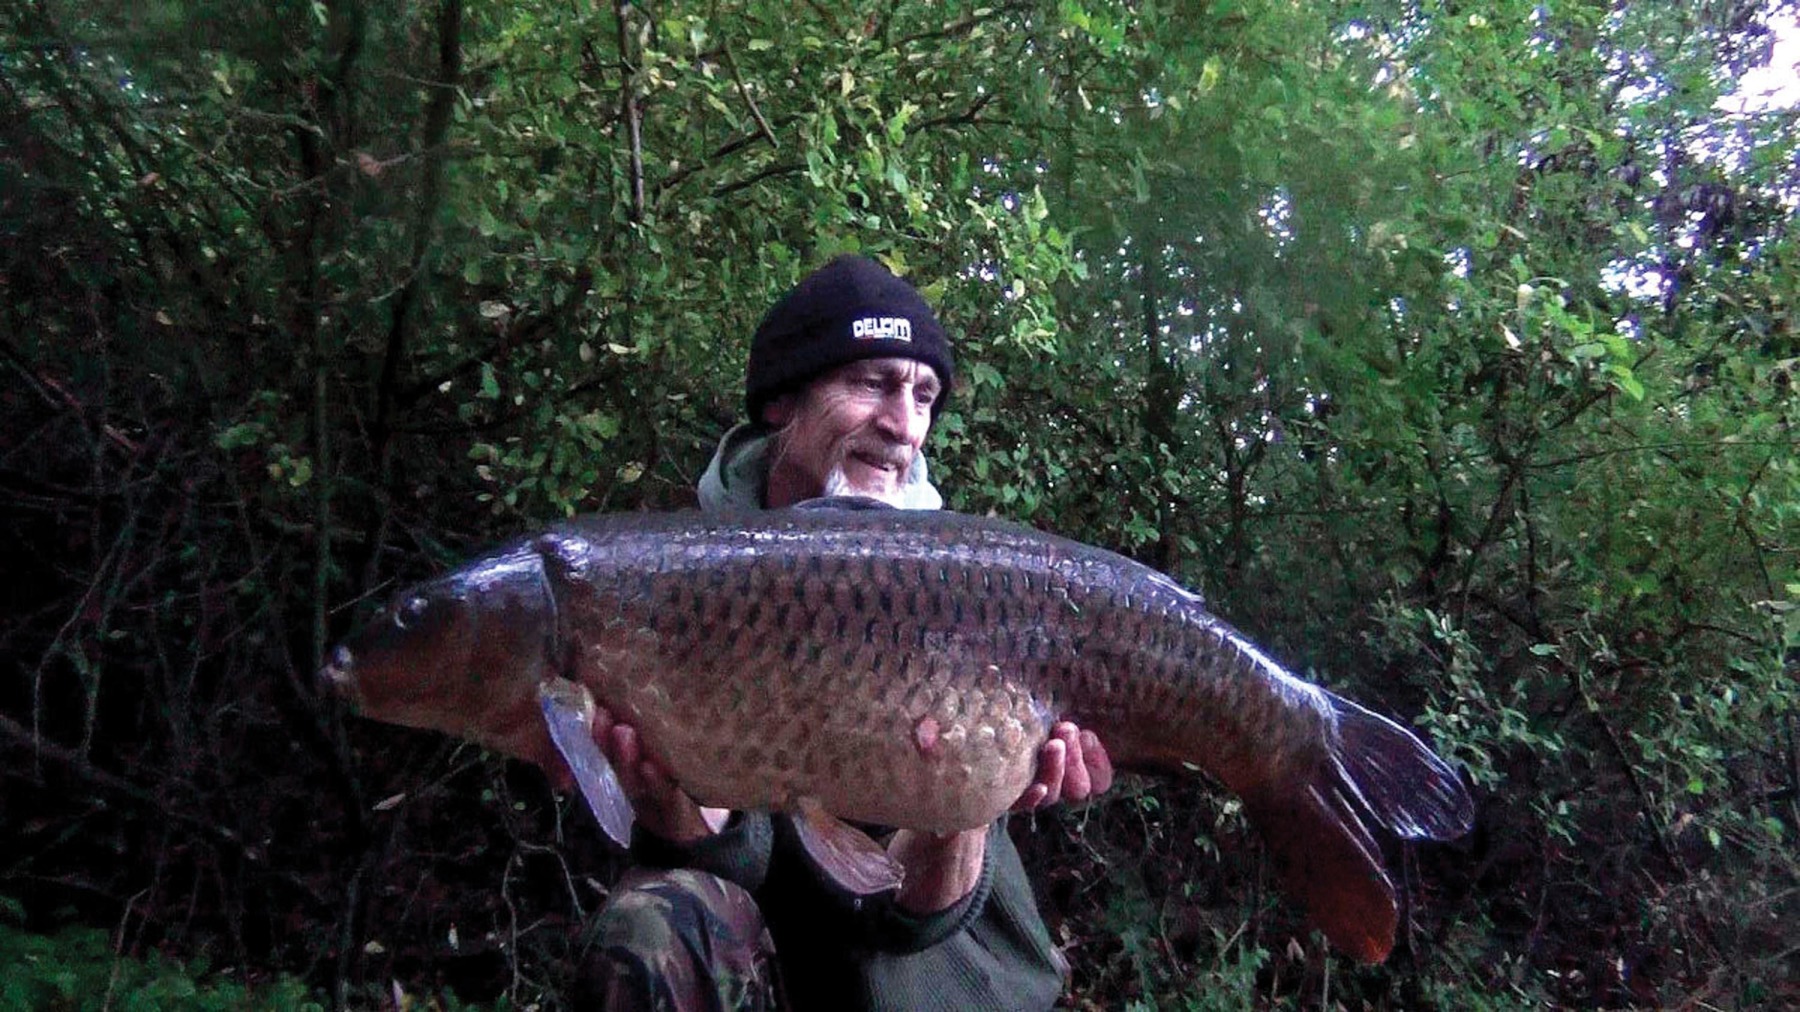 25lb common this time